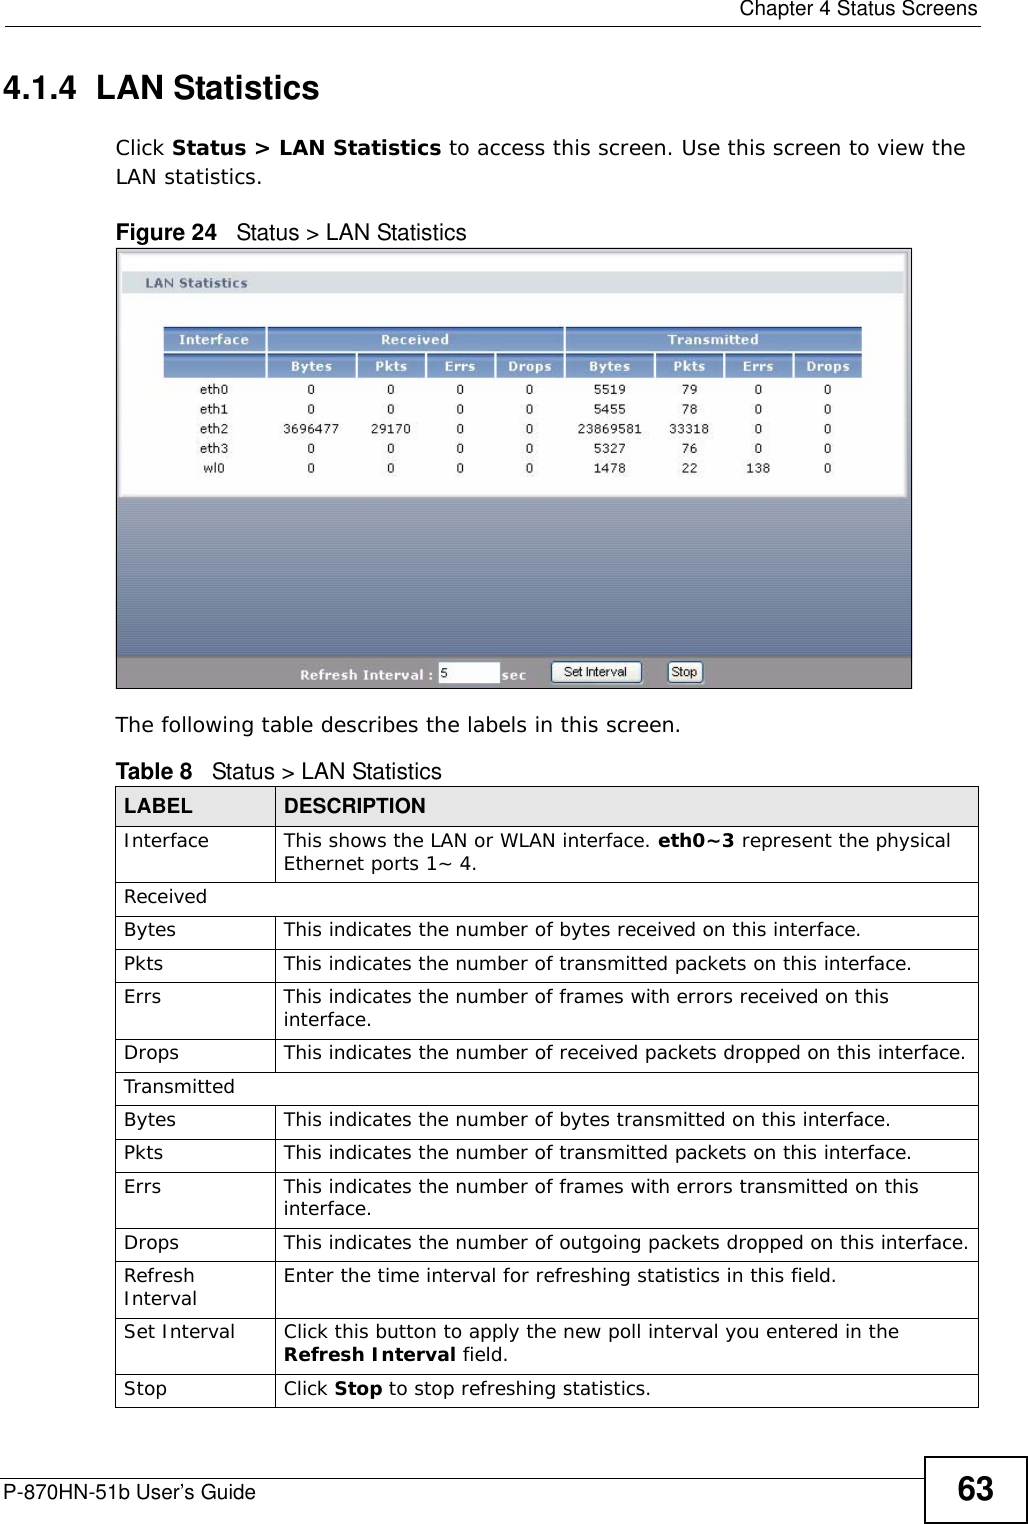  Chapter 4 Status ScreensP-870HN-51b User’s Guide 634.1.4  LAN StatisticsClick Status &gt; LAN Statistics to access this screen. Use this screen to view the LAN statistics.Figure 24   Status &gt; LAN Statistics The following table describes the labels in this screen. Table 8   Status &gt; LAN StatisticsLABEL DESCRIPTIONInterface This shows the LAN or WLAN interface. eth0~3 represent the physical Ethernet ports 1~ 4. ReceivedBytes This indicates the number of bytes received on this interface.Pkts This indicates the number of transmitted packets on this interface.Errs This indicates the number of frames with errors received on this interface.Drops This indicates the number of received packets dropped on this interface.TransmittedBytes This indicates the number of bytes transmitted on this interface.Pkts This indicates the number of transmitted packets on this interface.Errs This indicates the number of frames with errors transmitted on this interface.Drops This indicates the number of outgoing packets dropped on this interface.Refresh Interval Enter the time interval for refreshing statistics in this field.Set Interval Click this button to apply the new poll interval you entered in the Refresh Interval field.Stop Click Stop to stop refreshing statistics.